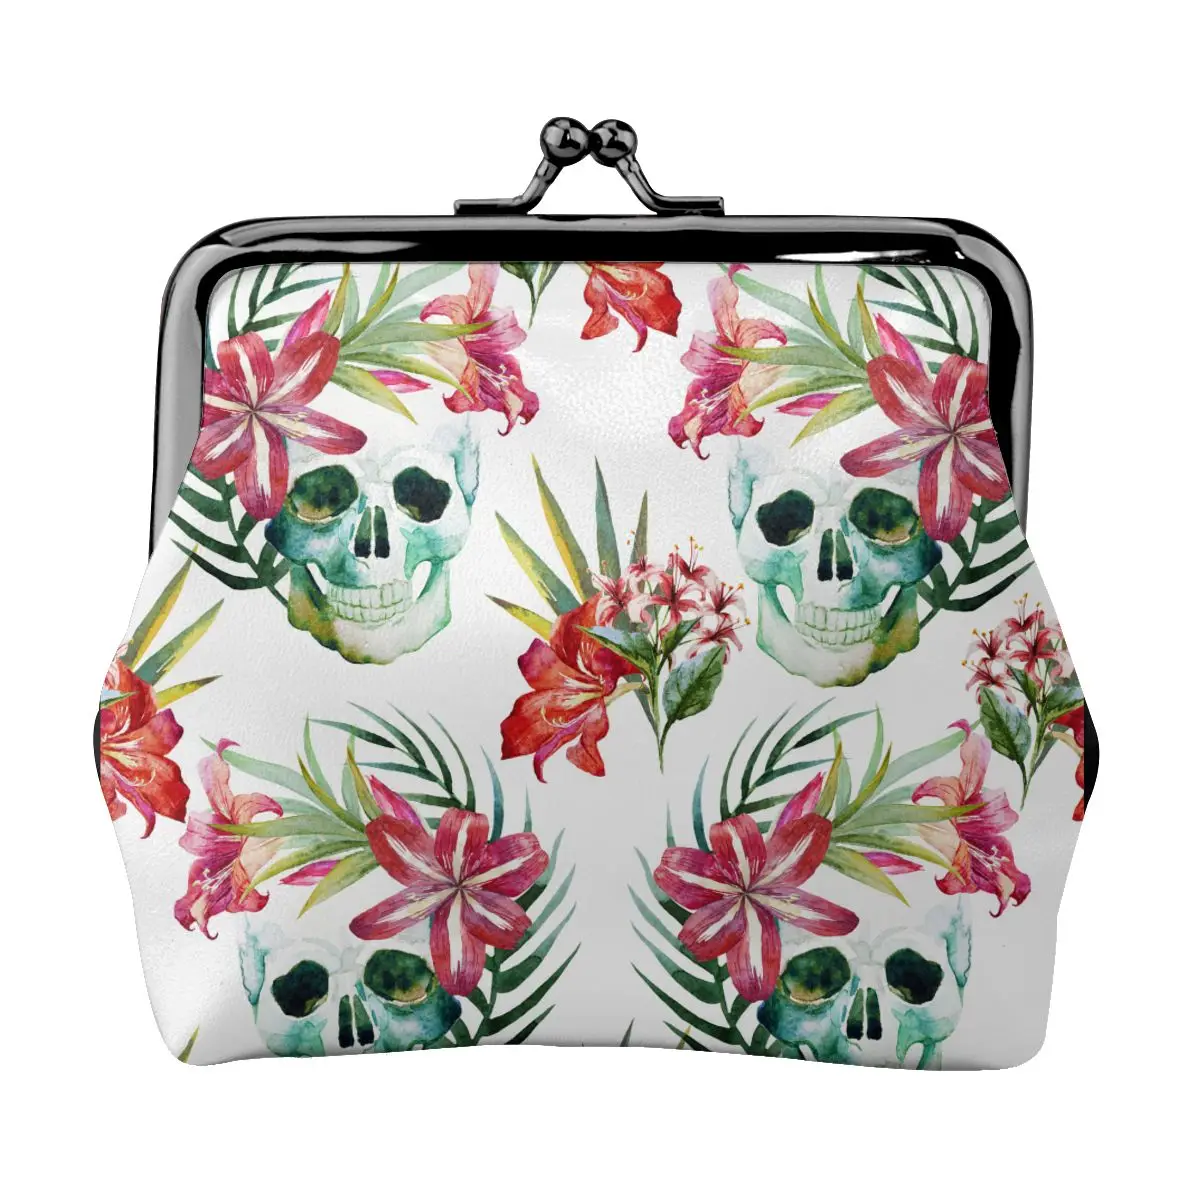 Women's Wallet Short Coin Purse Wallets For Woman Card Holder Skull And Flower